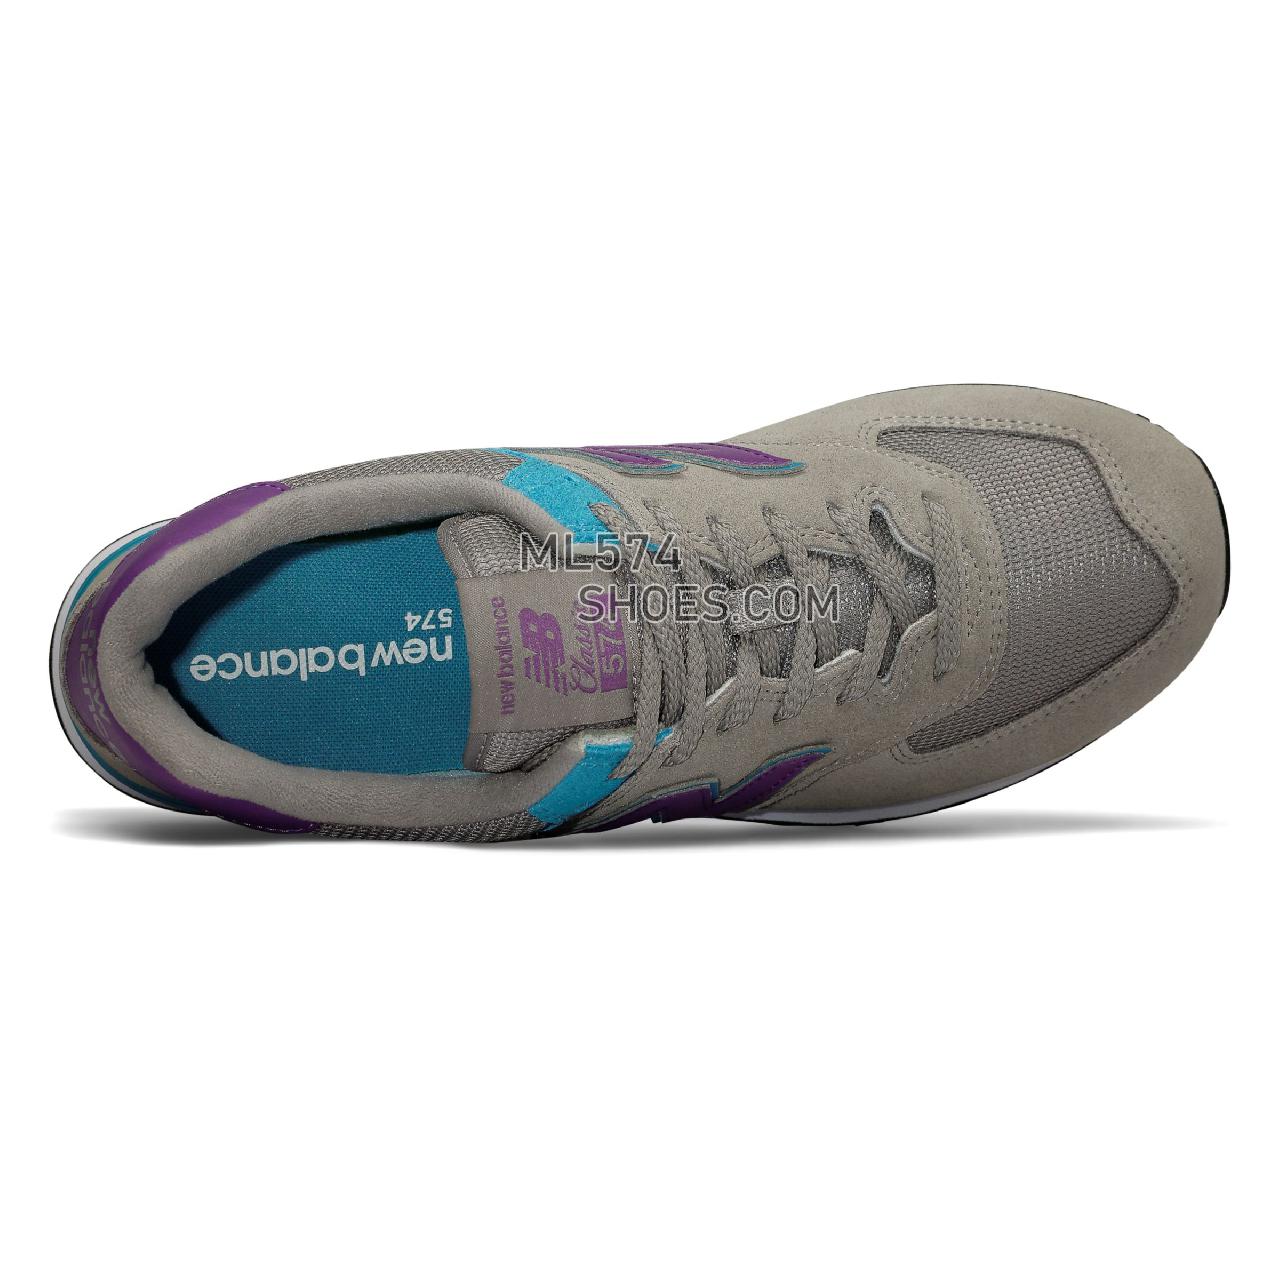 New Balance 574 - Men's 574 - Classic Rain Cloud with Faded Violet - ML574SML